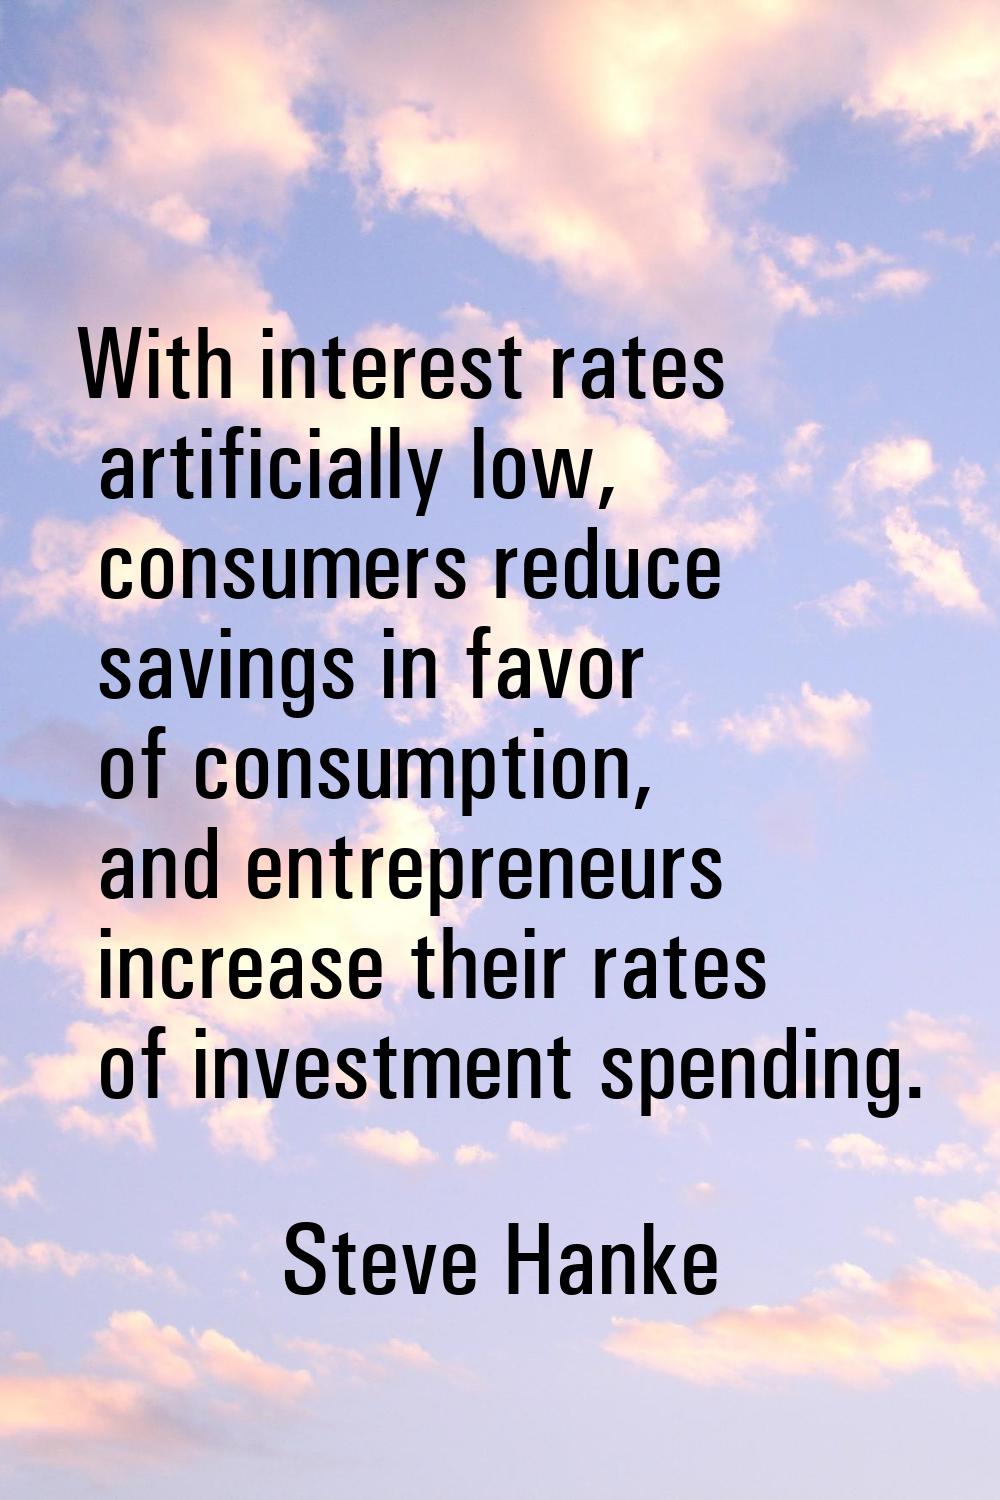 With interest rates artificially low, consumers reduce savings in favor of consumption, and entrepr